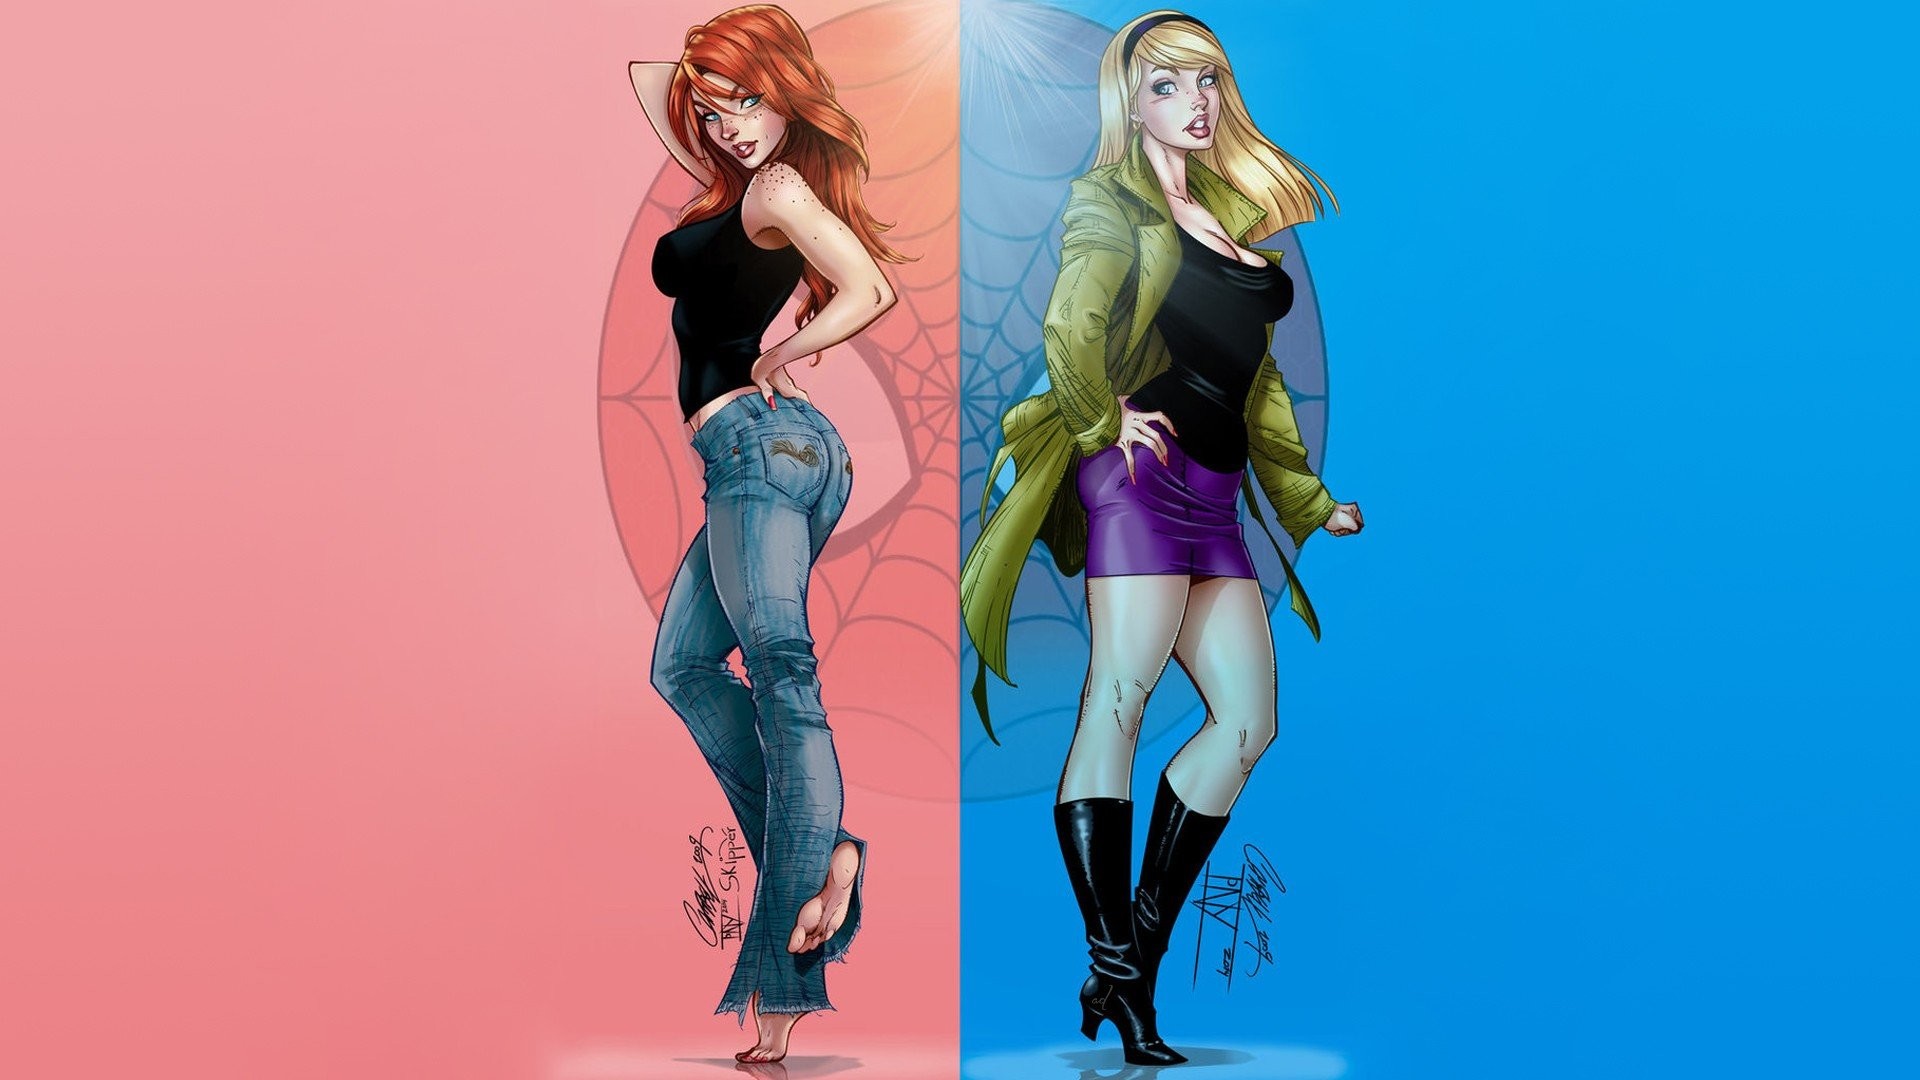 1920x1080 Mary Jane, Gwen Stacy, J. Scott Campbell, Women, Spider Man, Marvel Comics,  Pink, Blue, Collage, Artwork HD Wallpapers / Desktop and Mobile Images &  Photos